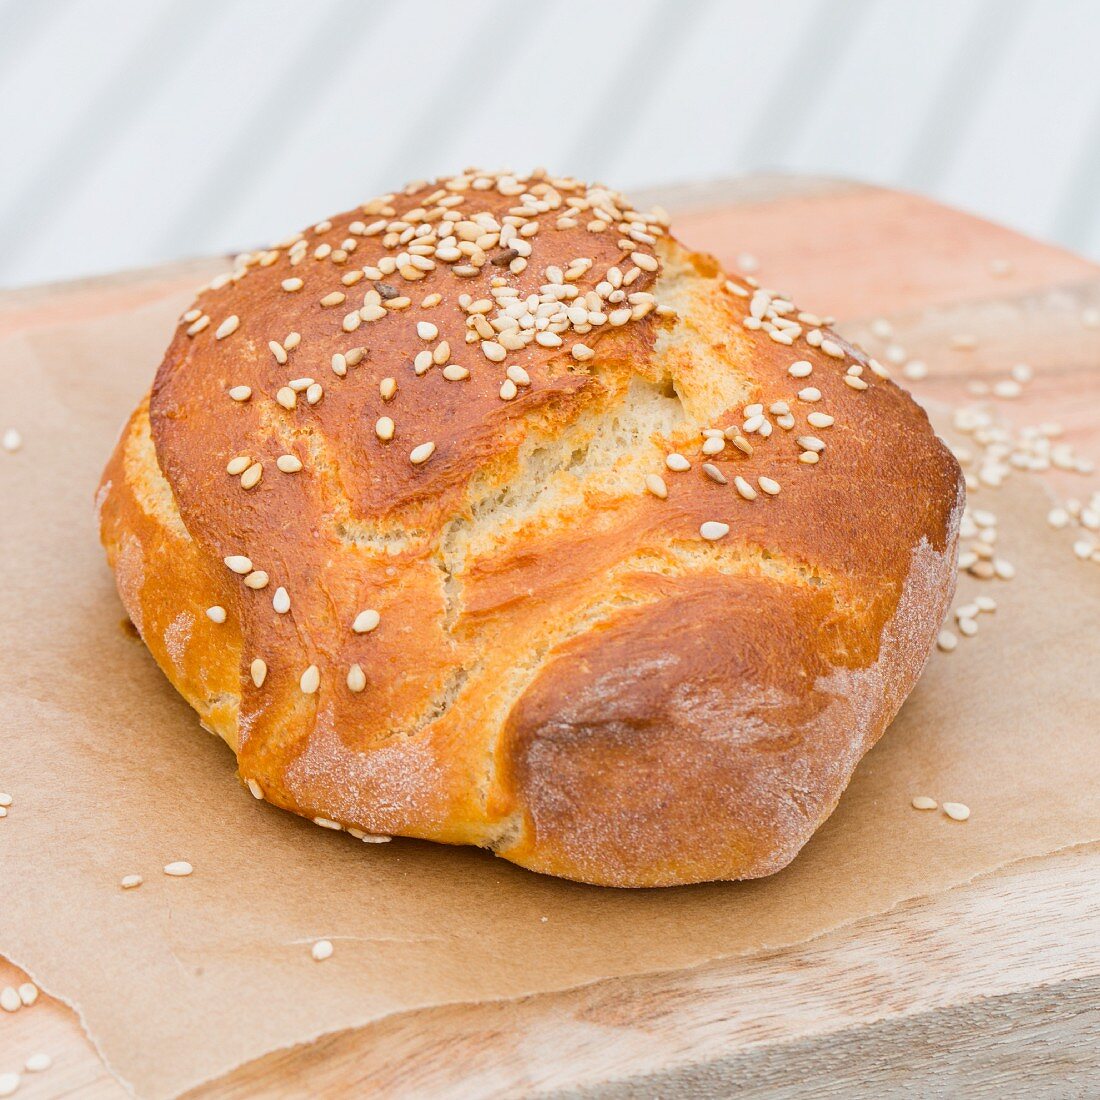 Freshly baked brioche with sesame seeds